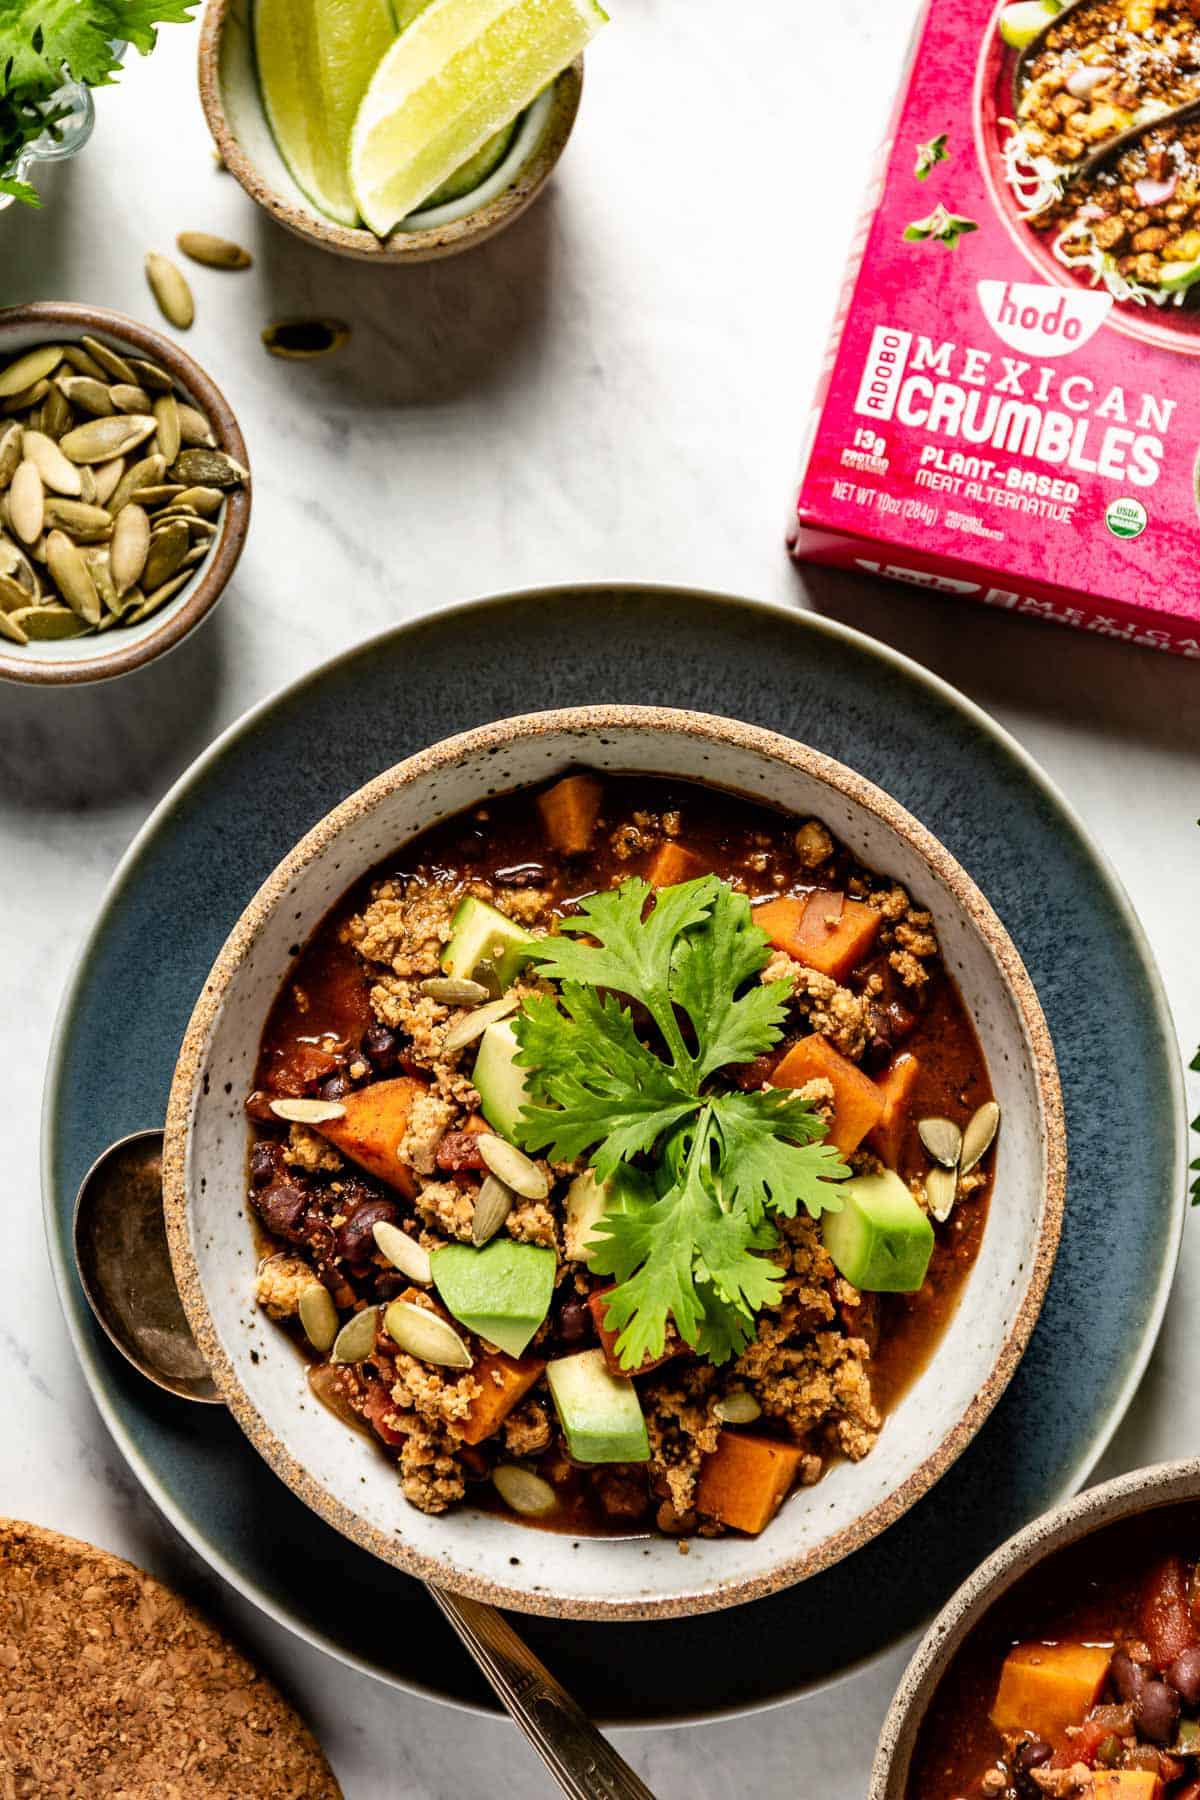 Vegan Chocolate Chili in a bowl with condiments on the side